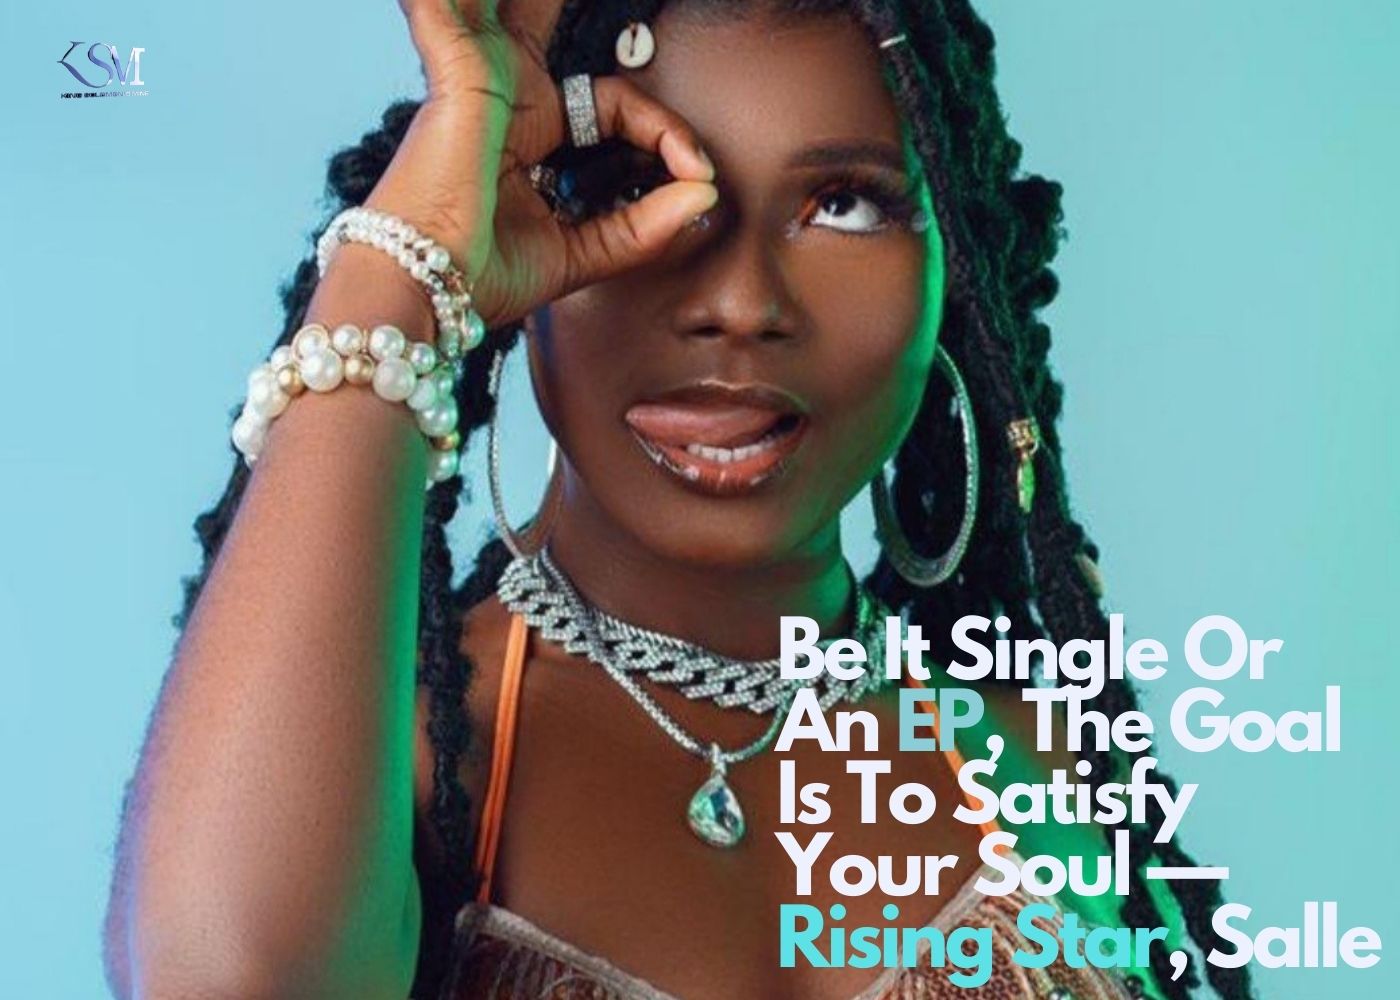 Be It Single Or An EP, The Goal Is To Satisfy Your Soul â€”Rising Star, Salle